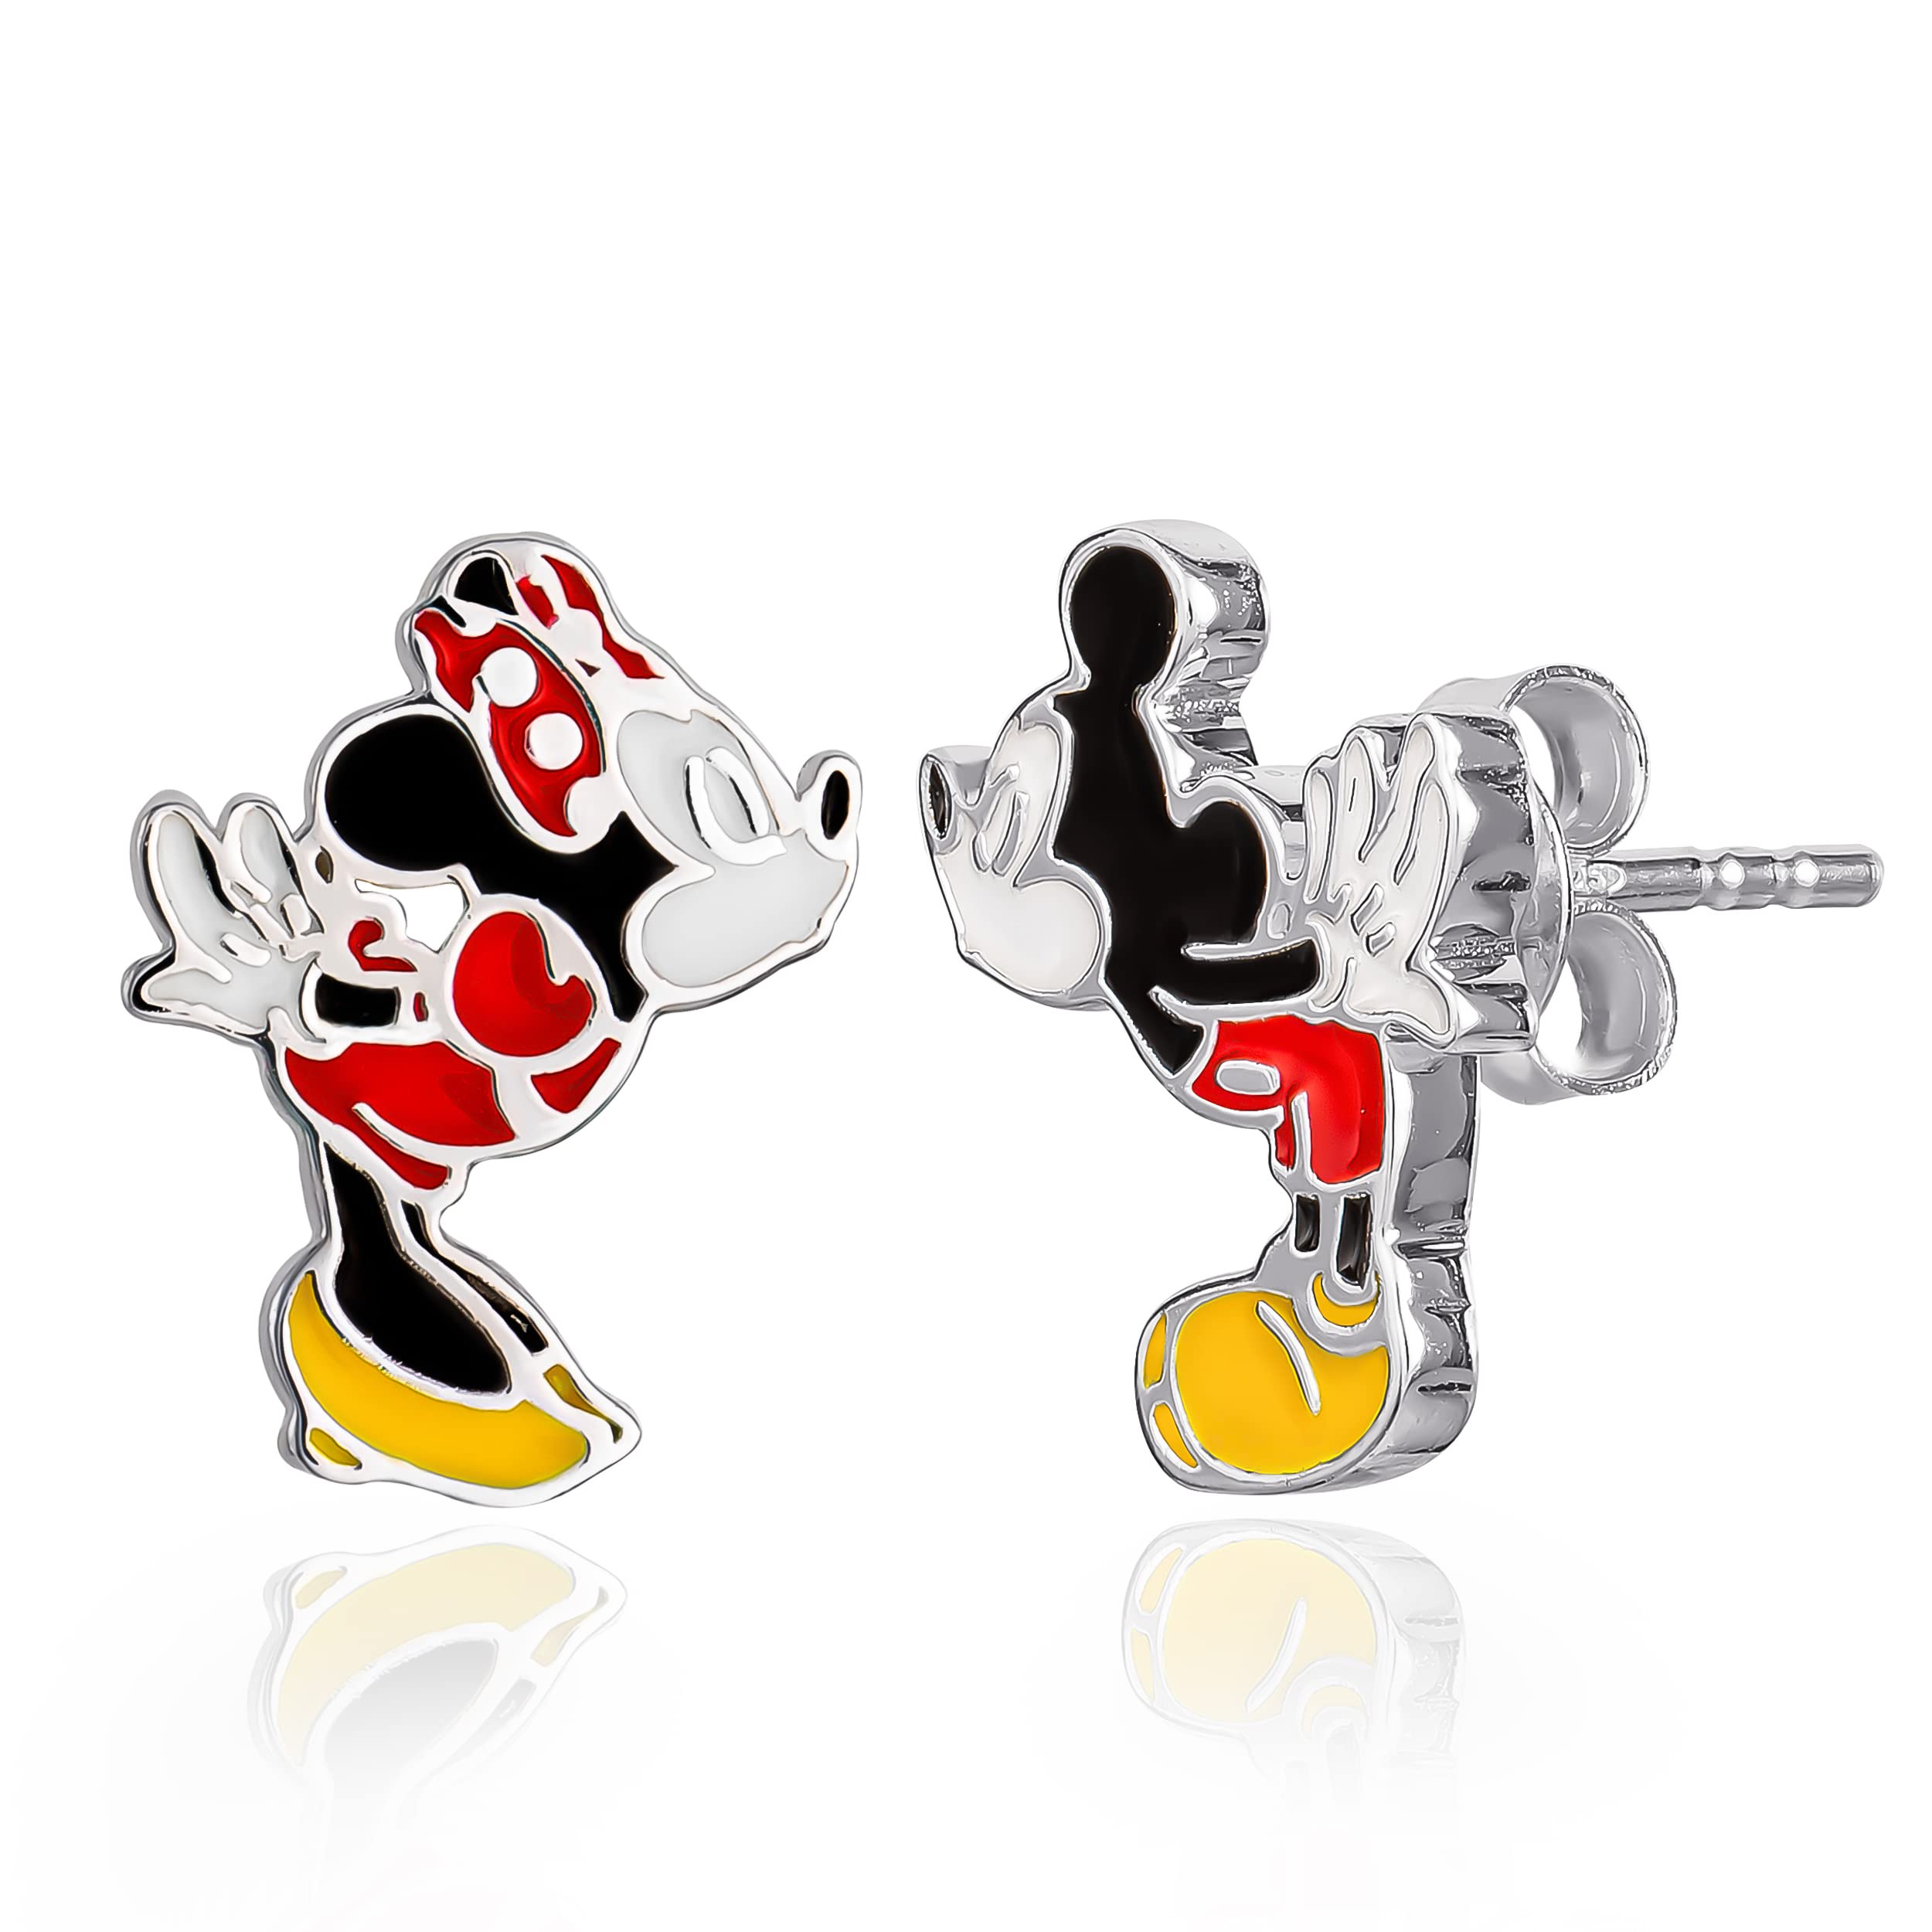 Disney Mismatched Stud Earrings - Mickey Mouse and Minnie Mouse Sterling Silver